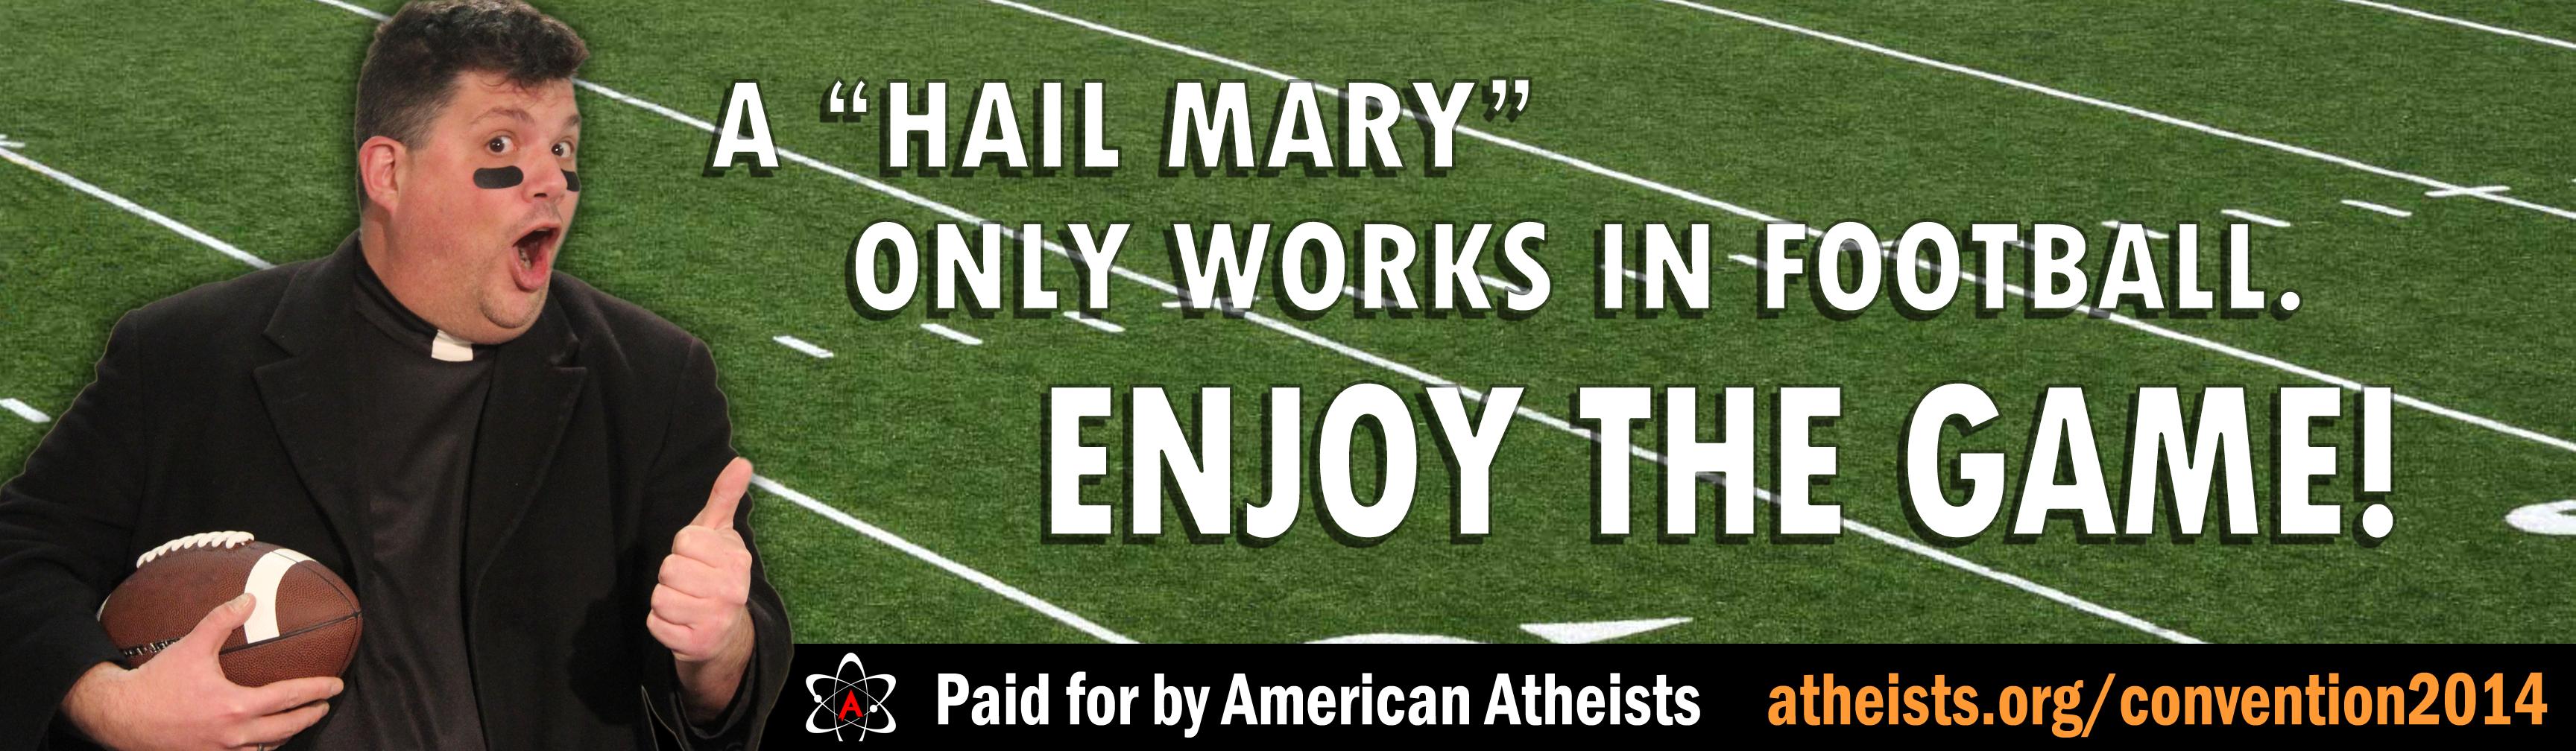 American Atheists to Launch Super Bowl Billboard: A ‘Hail Mary’ Only Works in Football